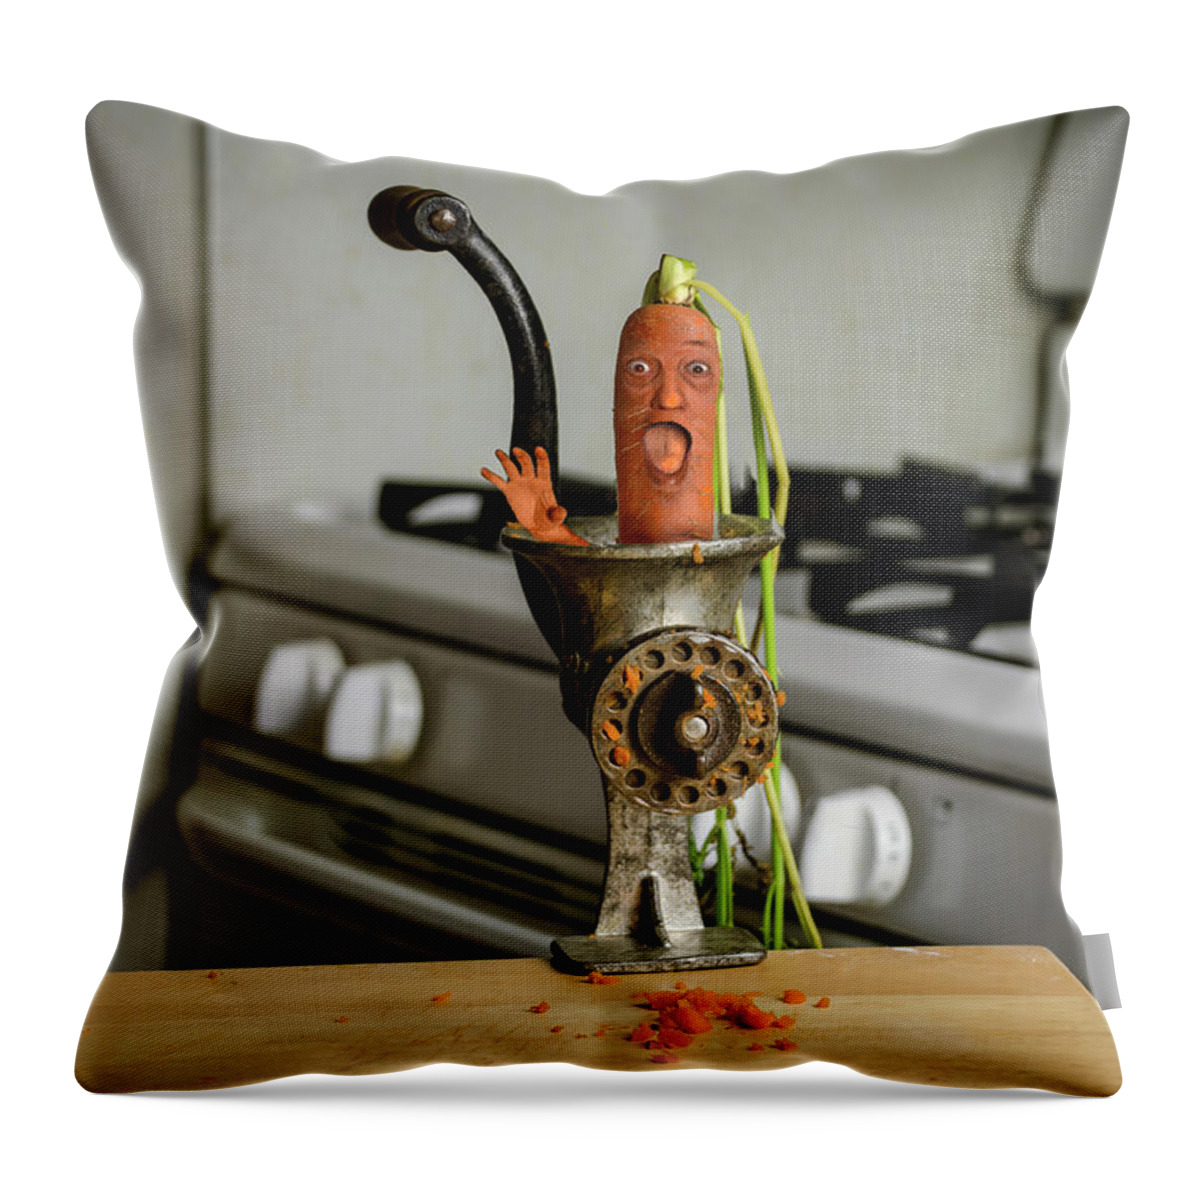 Orange Throw Pillow featuring the photograph Mr. Carrot by Rick Mosher